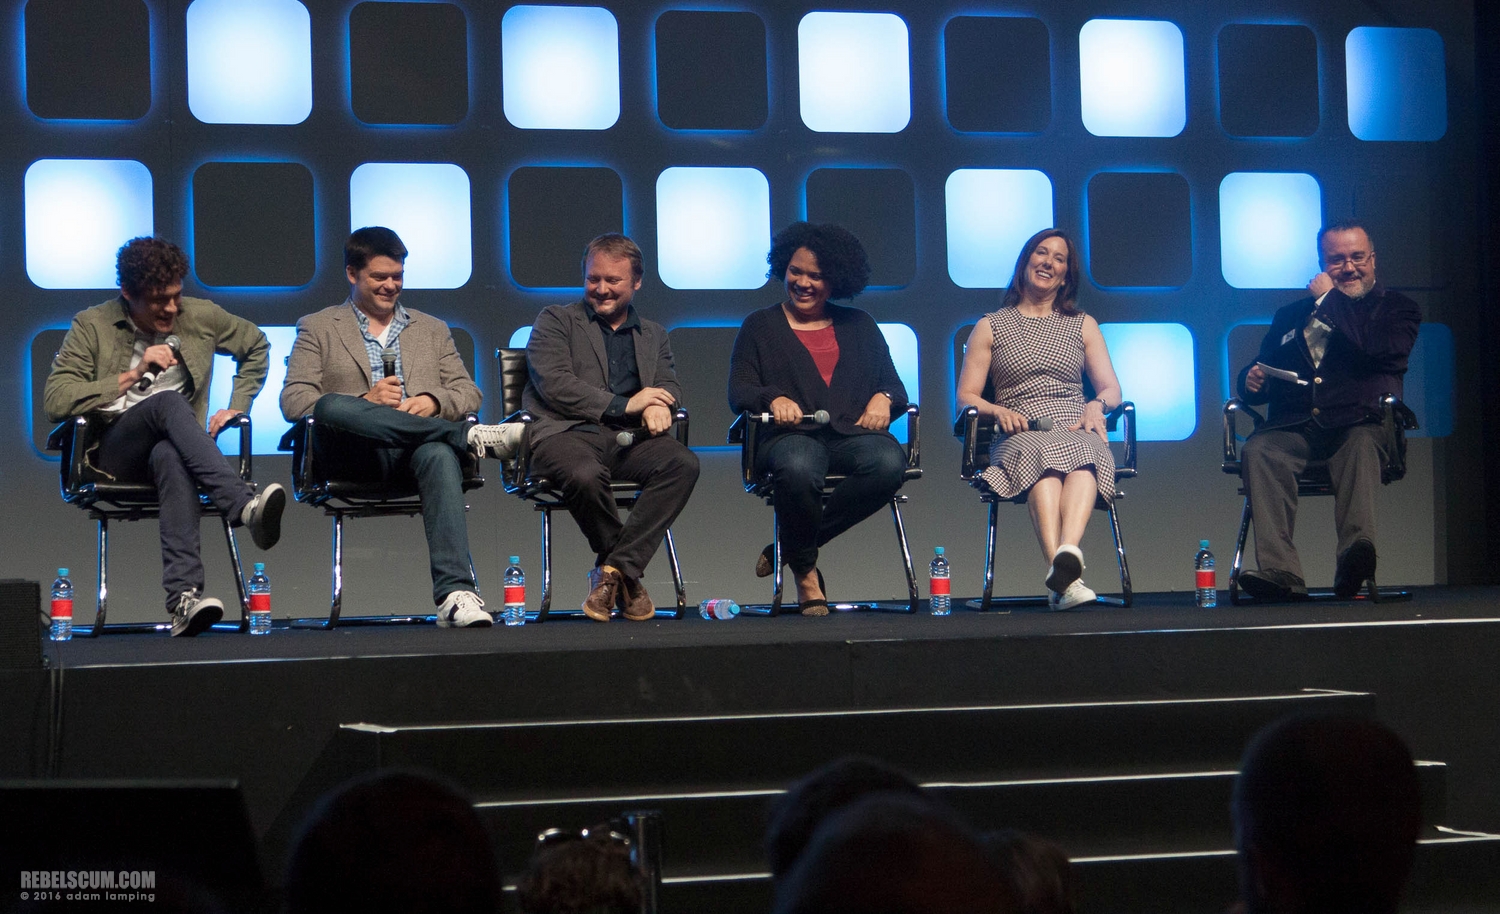 star-wars-celebration-2016-future-filmmakers-and-closing-ceremony-006.jpg